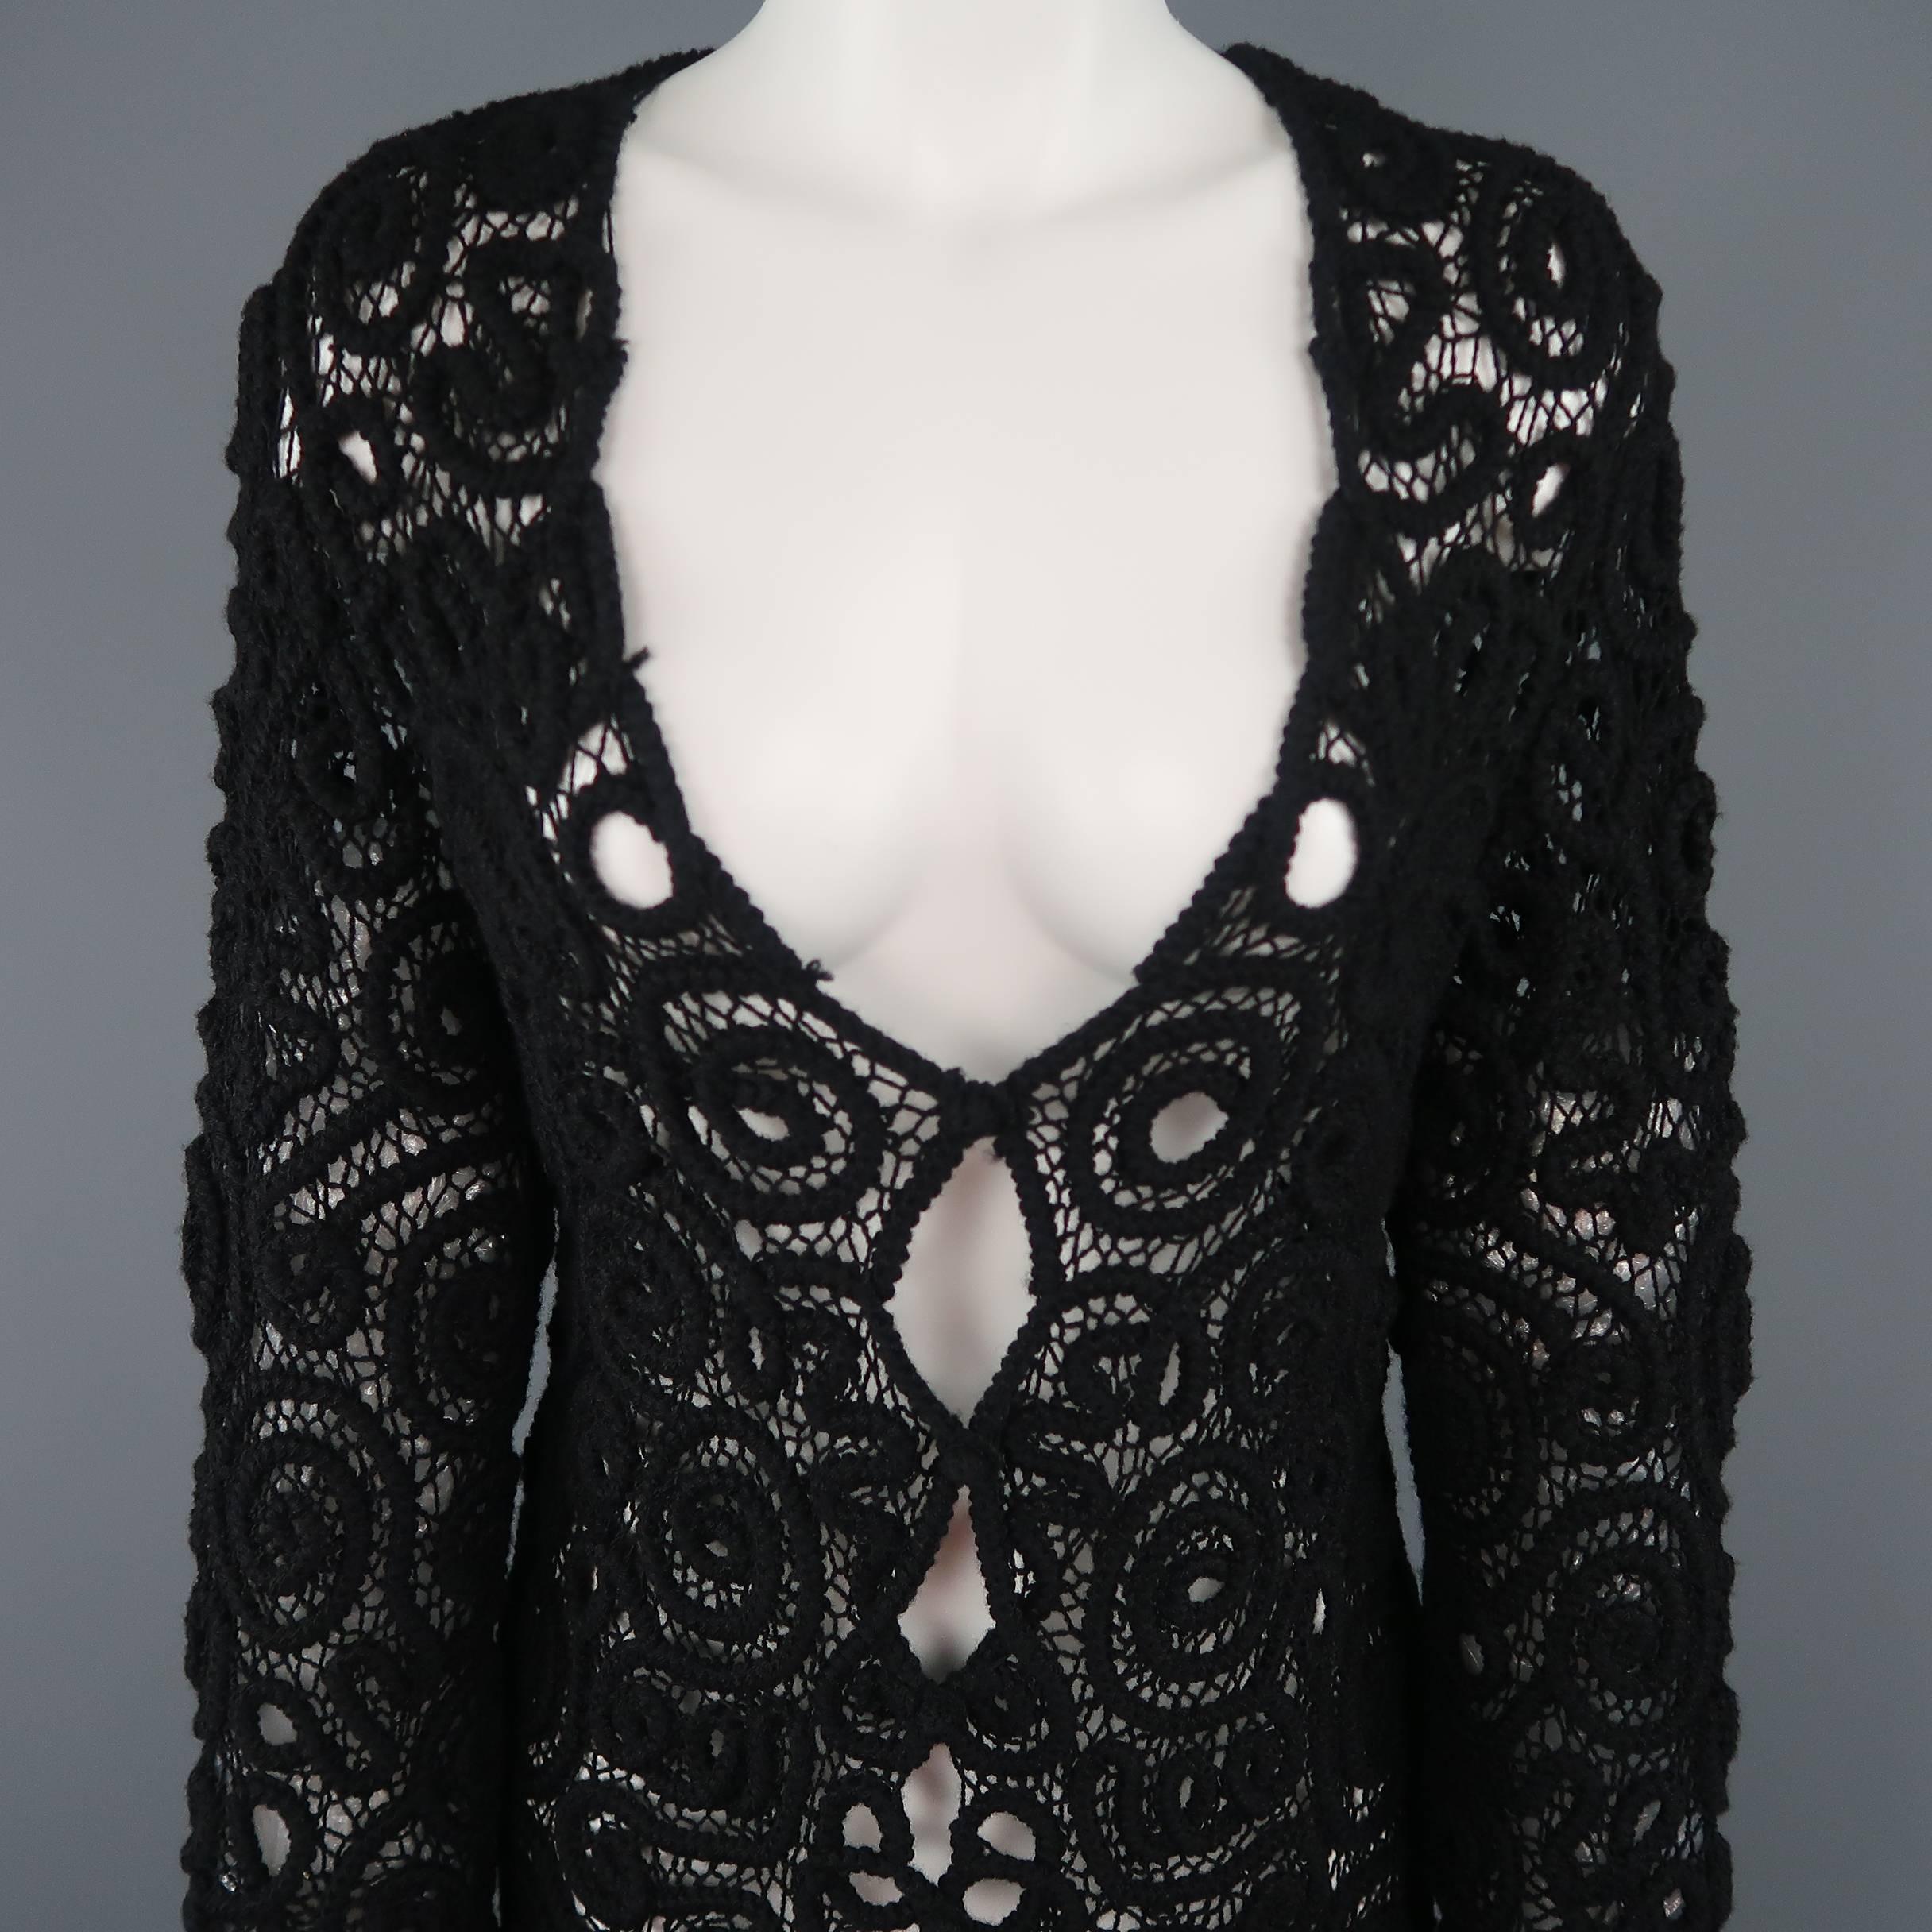 Vintage Matsuda cardigan comes in black wool lace crochet with a V neck and bi-level fringe hem. Minor wear. Made in Japan.
 
Good Pre-Owned Condition.
Marked: (no size)
 
Measurements:
 
Shoulder: 14 in.
Bust: 38 in.
Sleeve: 27 in.
Length: 35-41